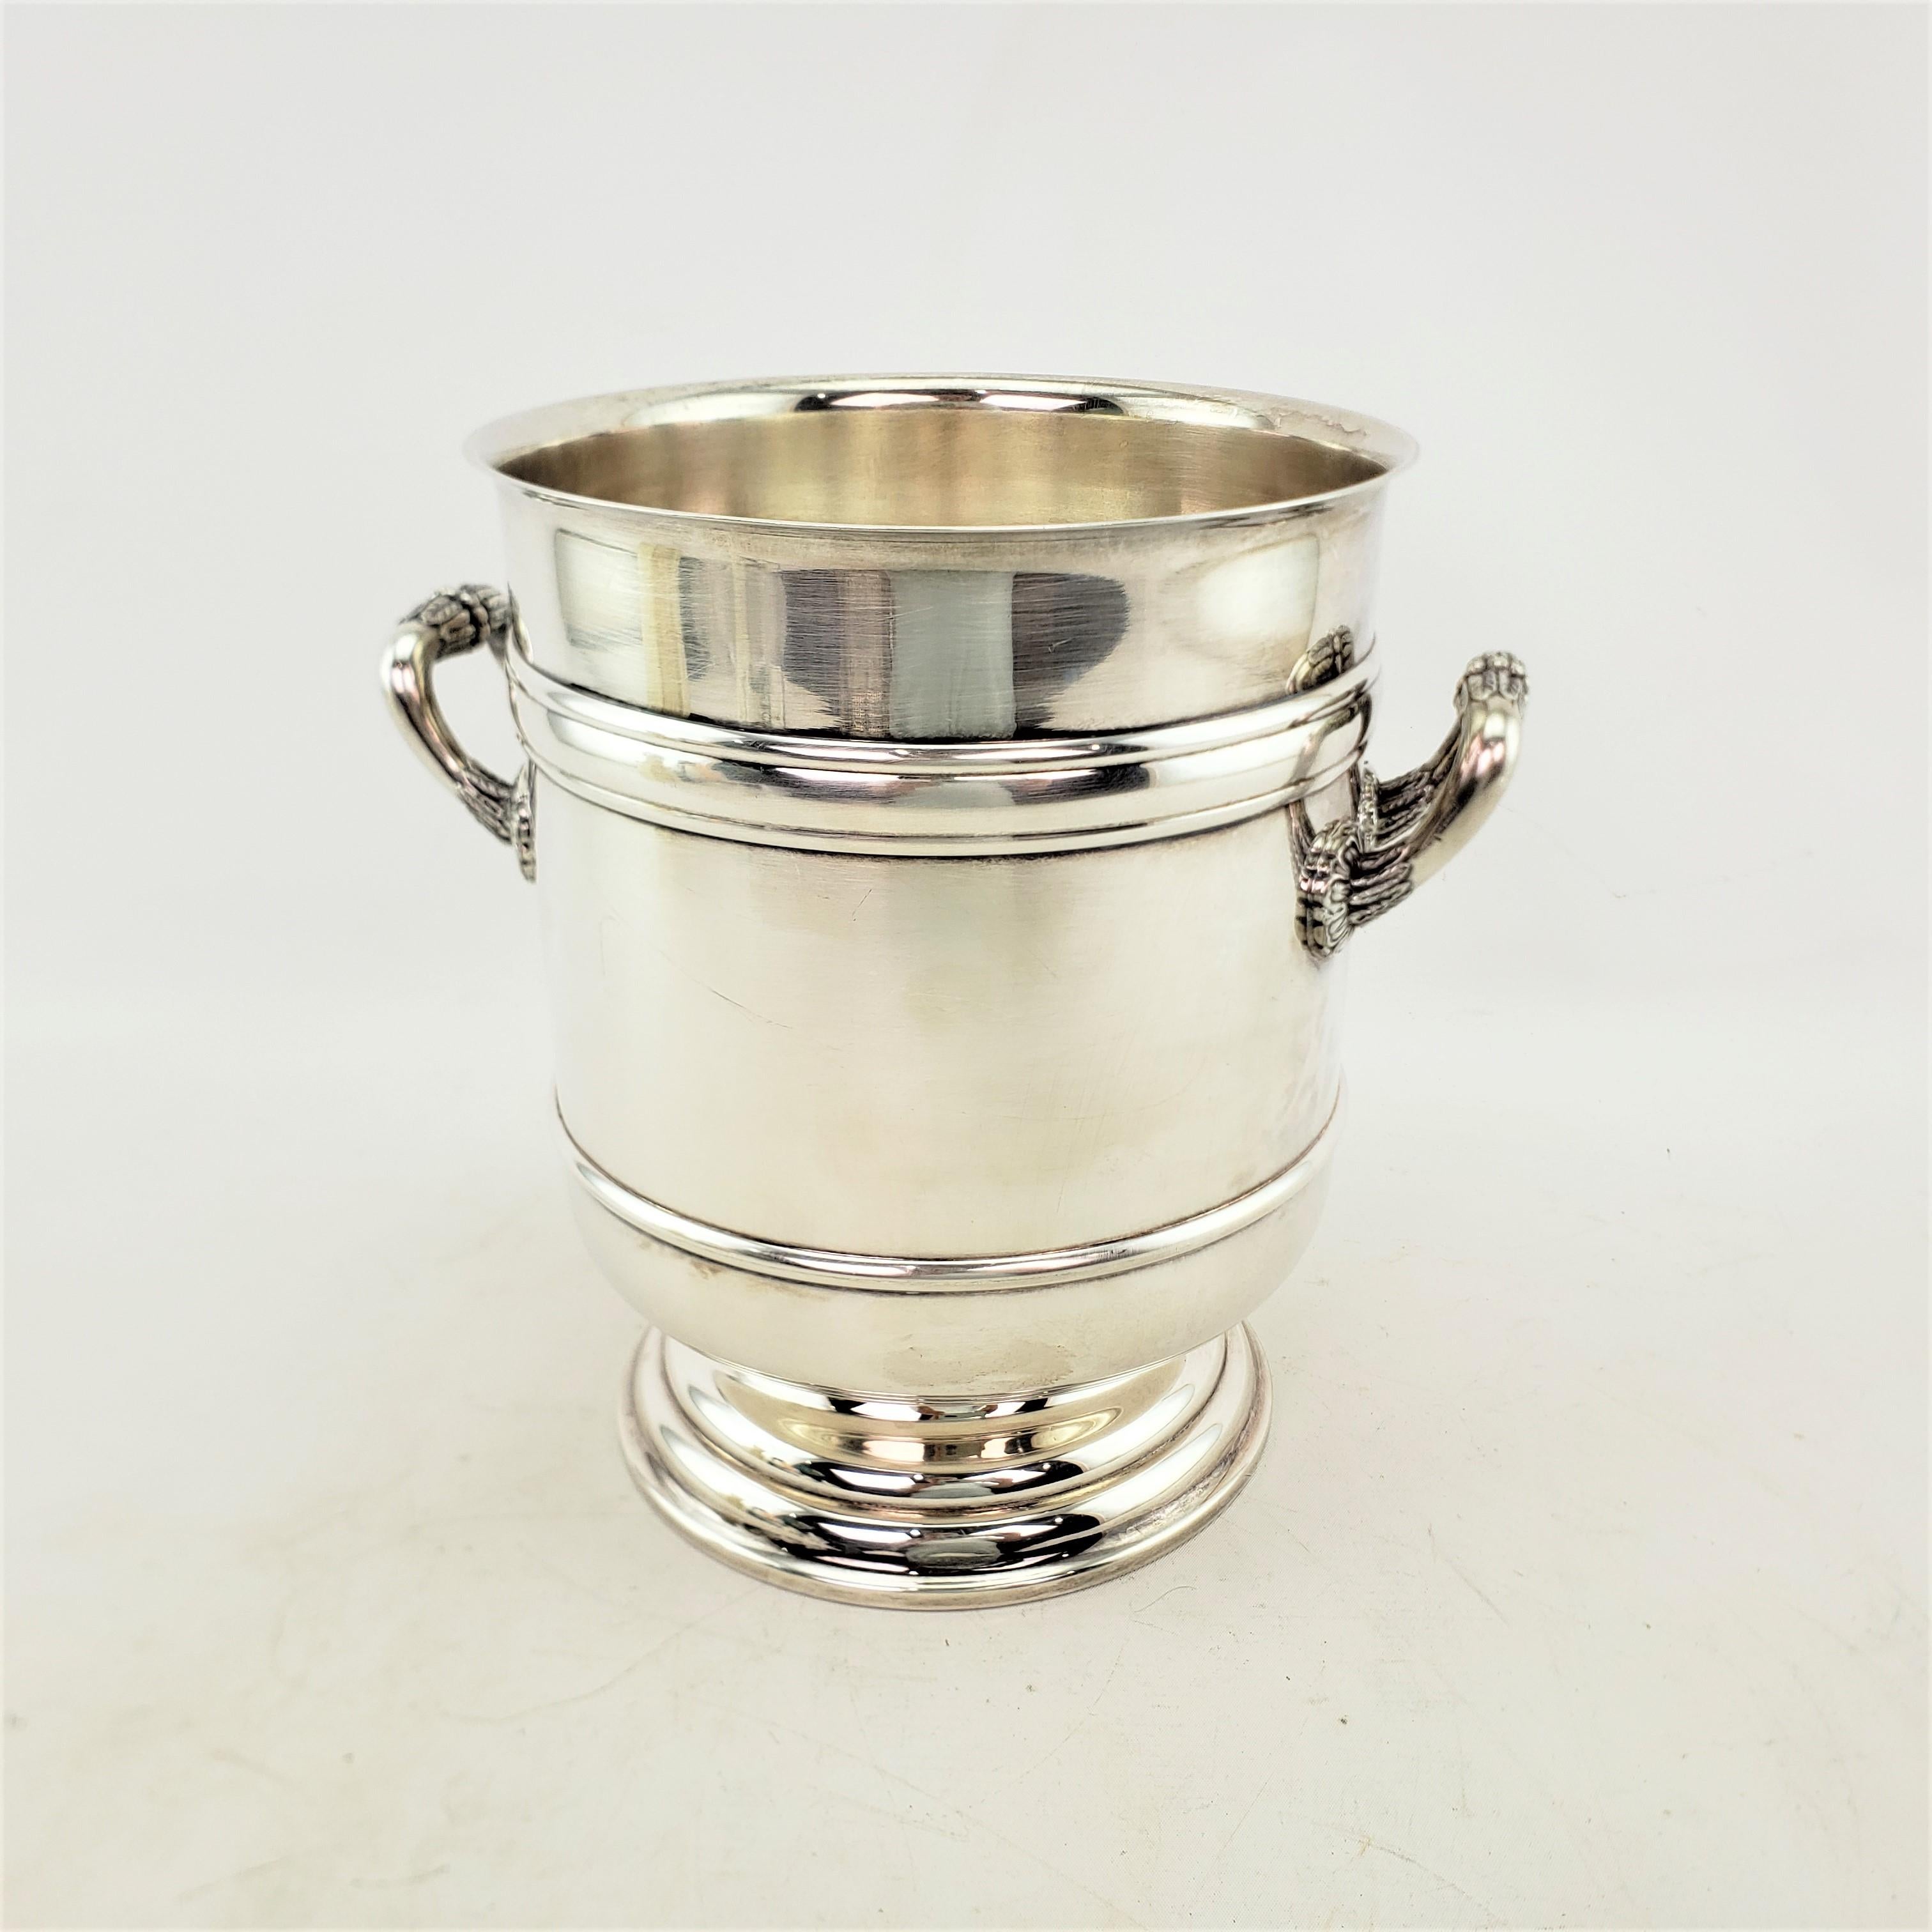 Art Deco Mid-Century Era Christofle Silver Plated Ice Bucket or Bottle Chiller For Sale